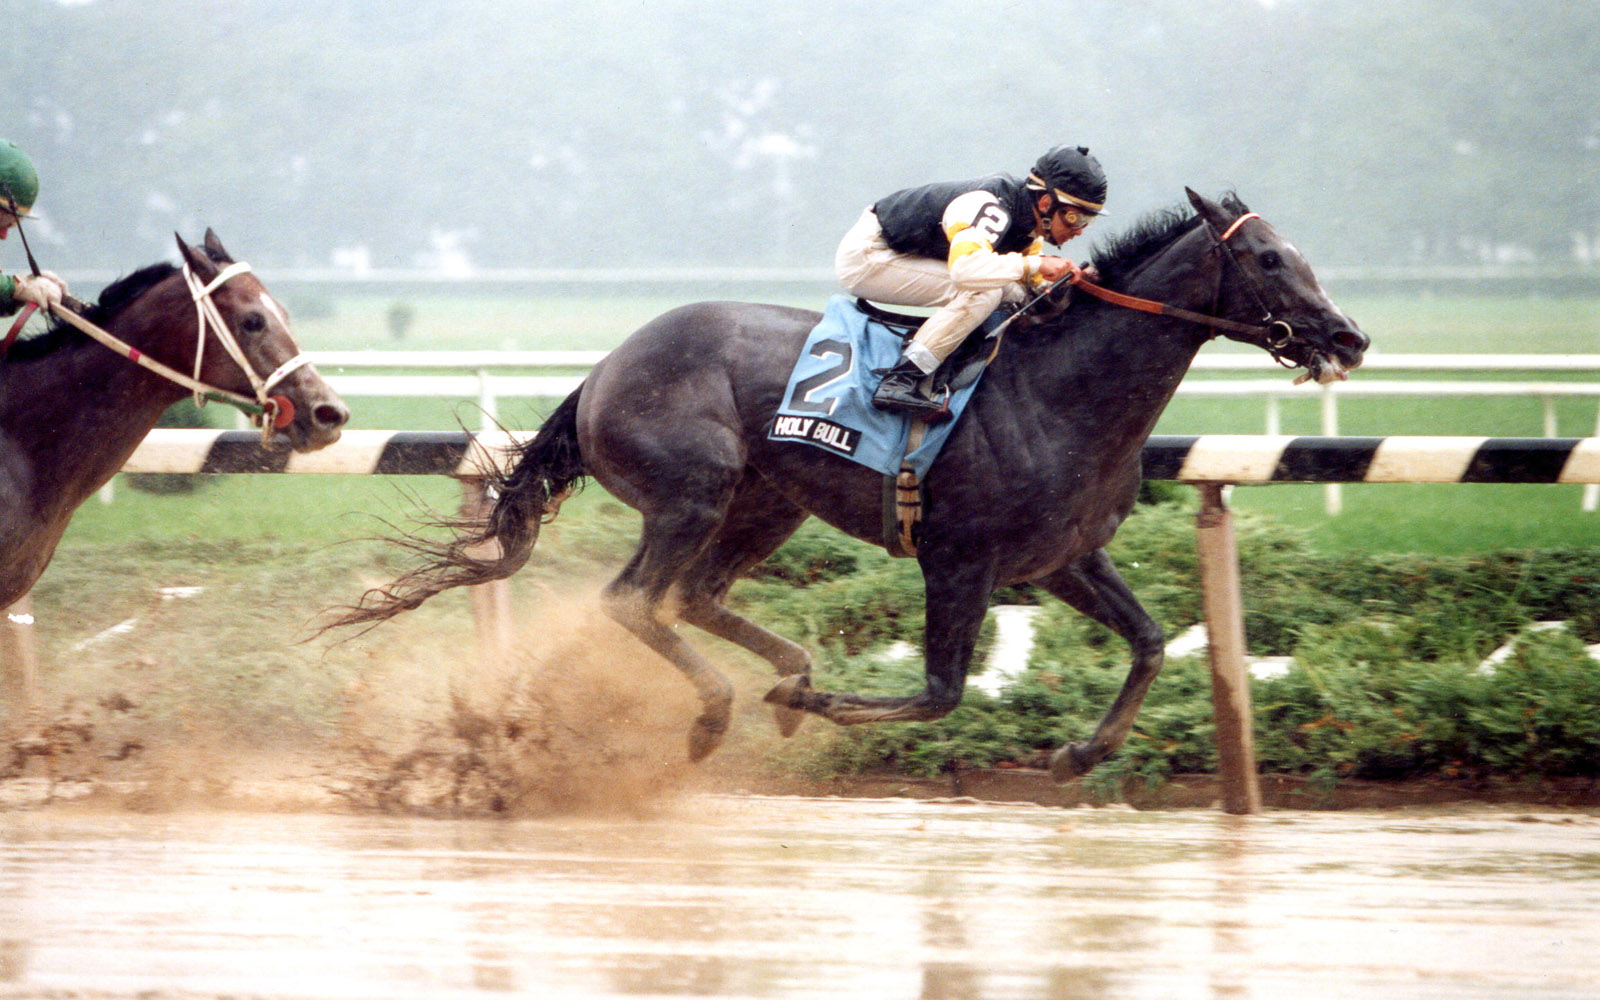 Holy Bull (Mike Smith up) winning the 1993 Futurity at Belmont Park (Barbara D. Livingston/Museum Collection)